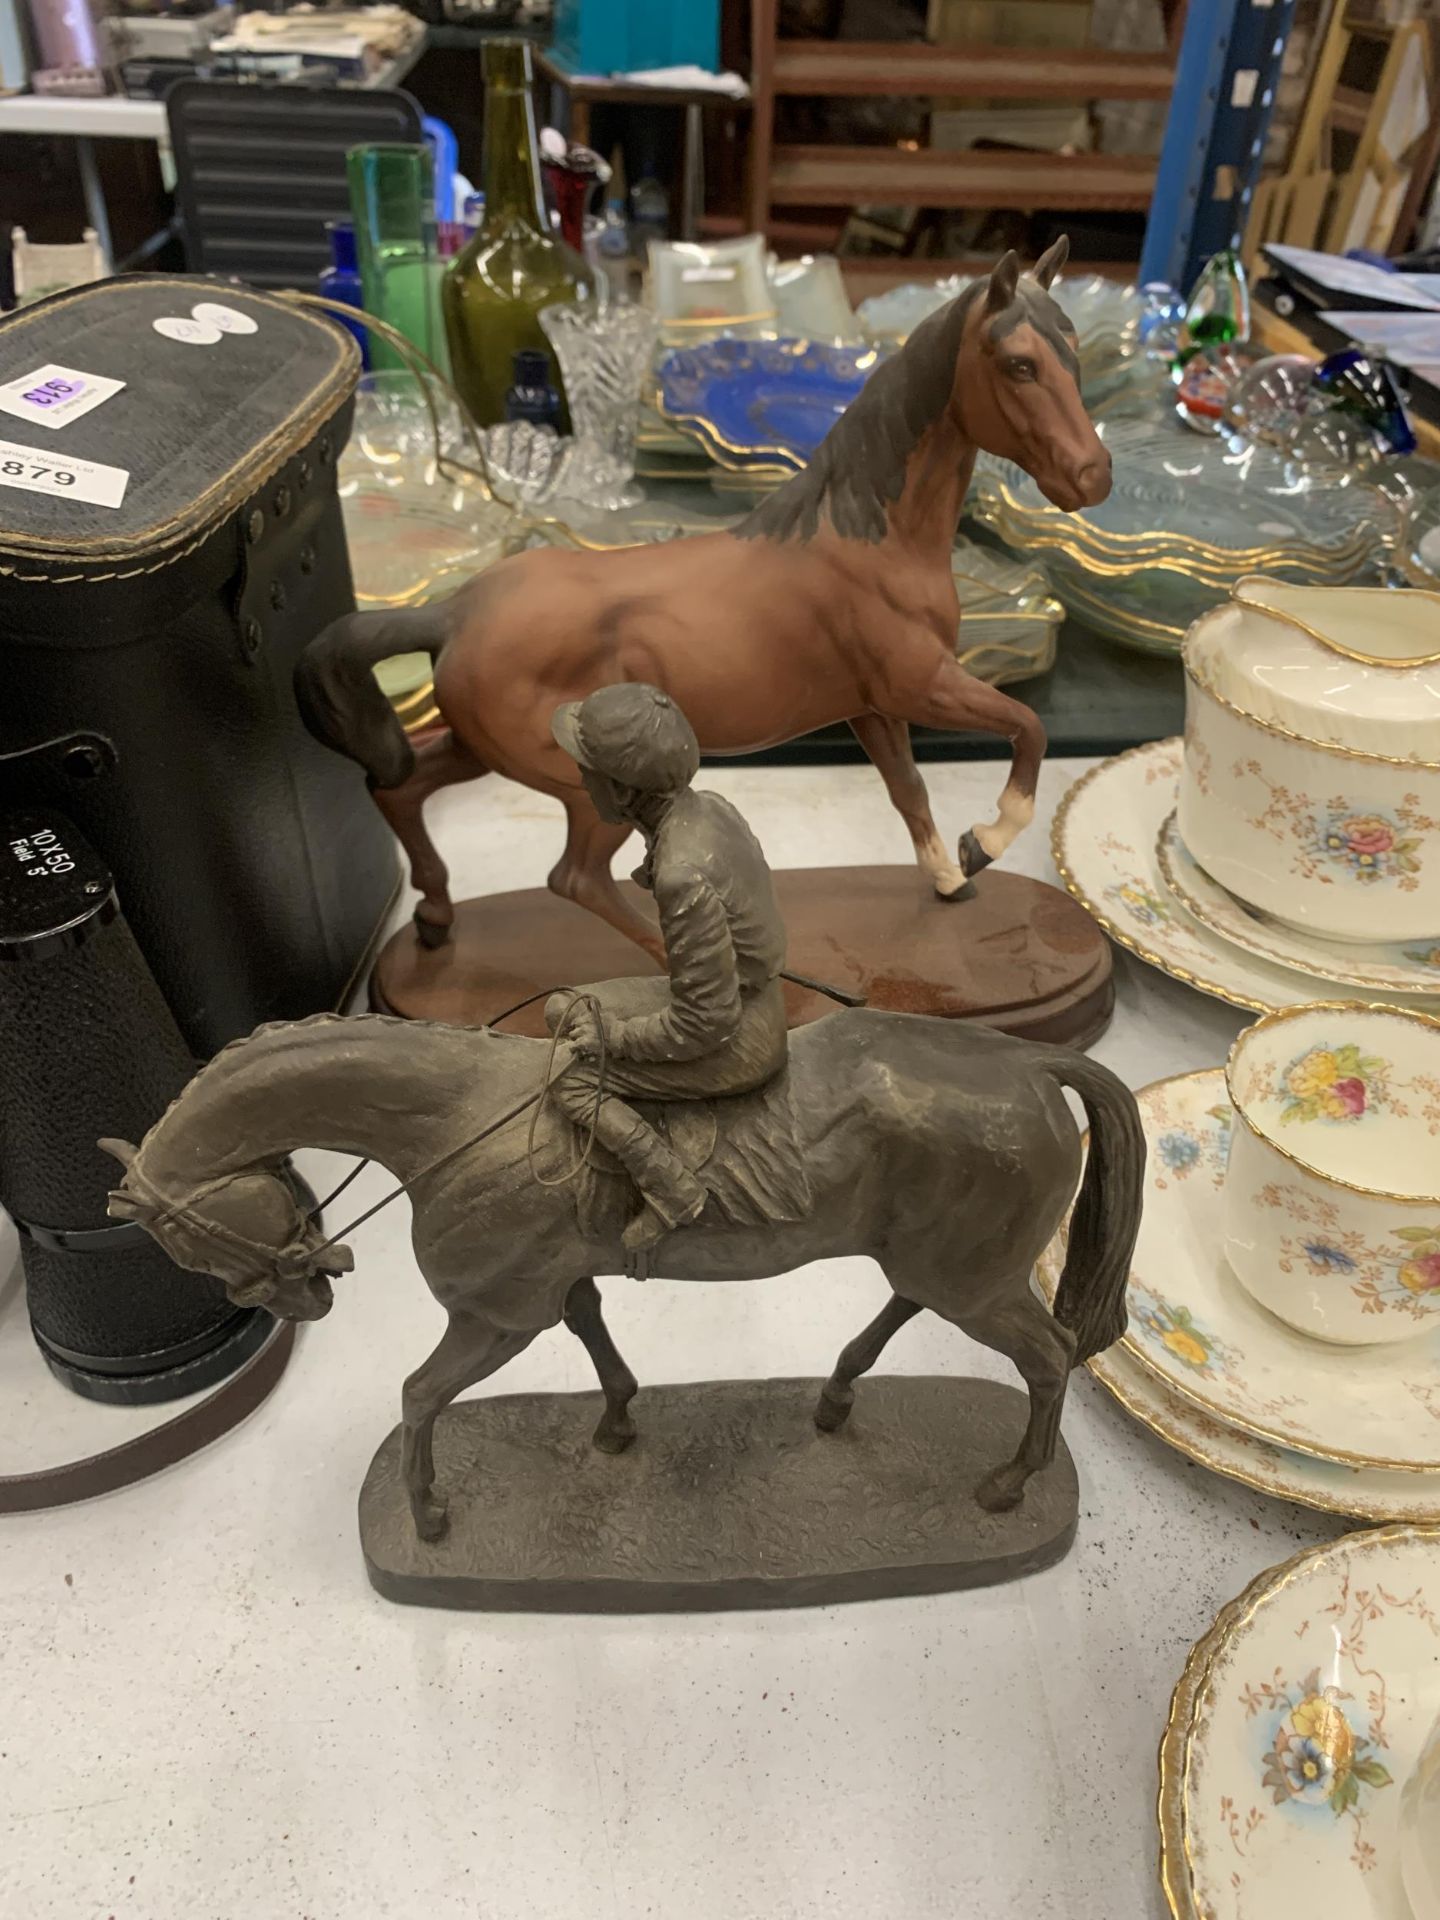 TWO HORSE RELATED ITEMS - RESIN HORSE AND JOCKEY AND A SPIRIT OF THE WIND EXAMPLE ON WOODEN PLINTH